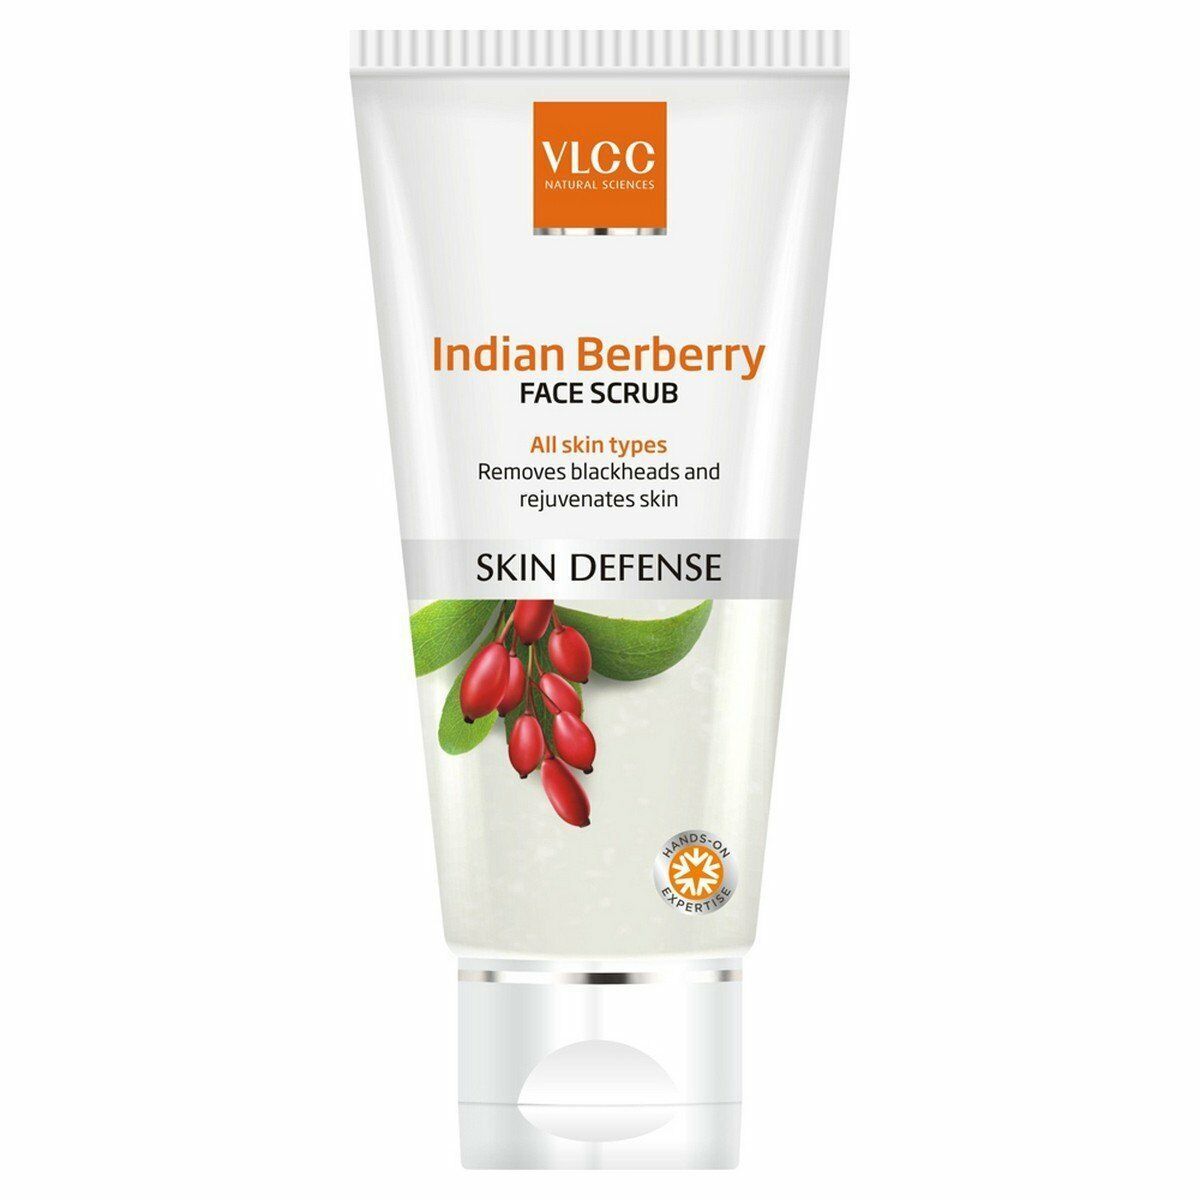 Primary image for VLCC Indian Berberry Face Scrub, 80g